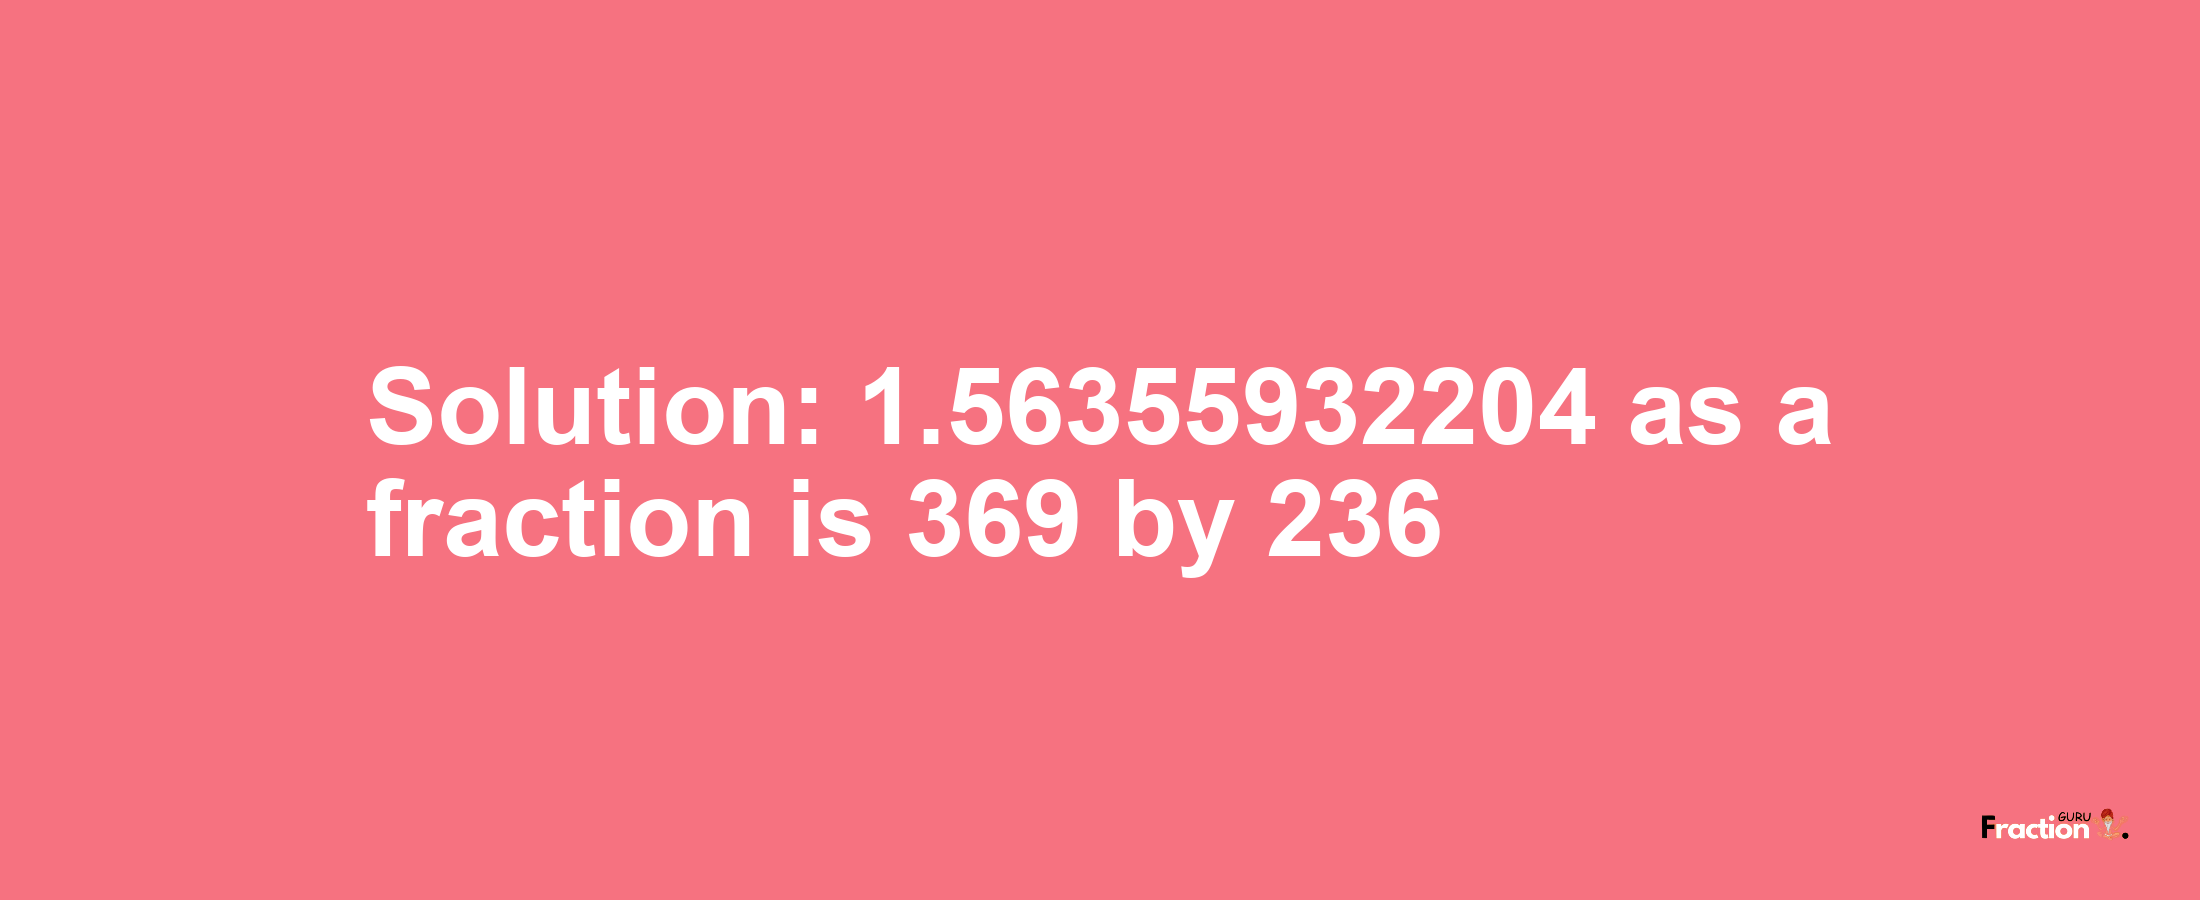 Solution:1.56355932204 as a fraction is 369/236